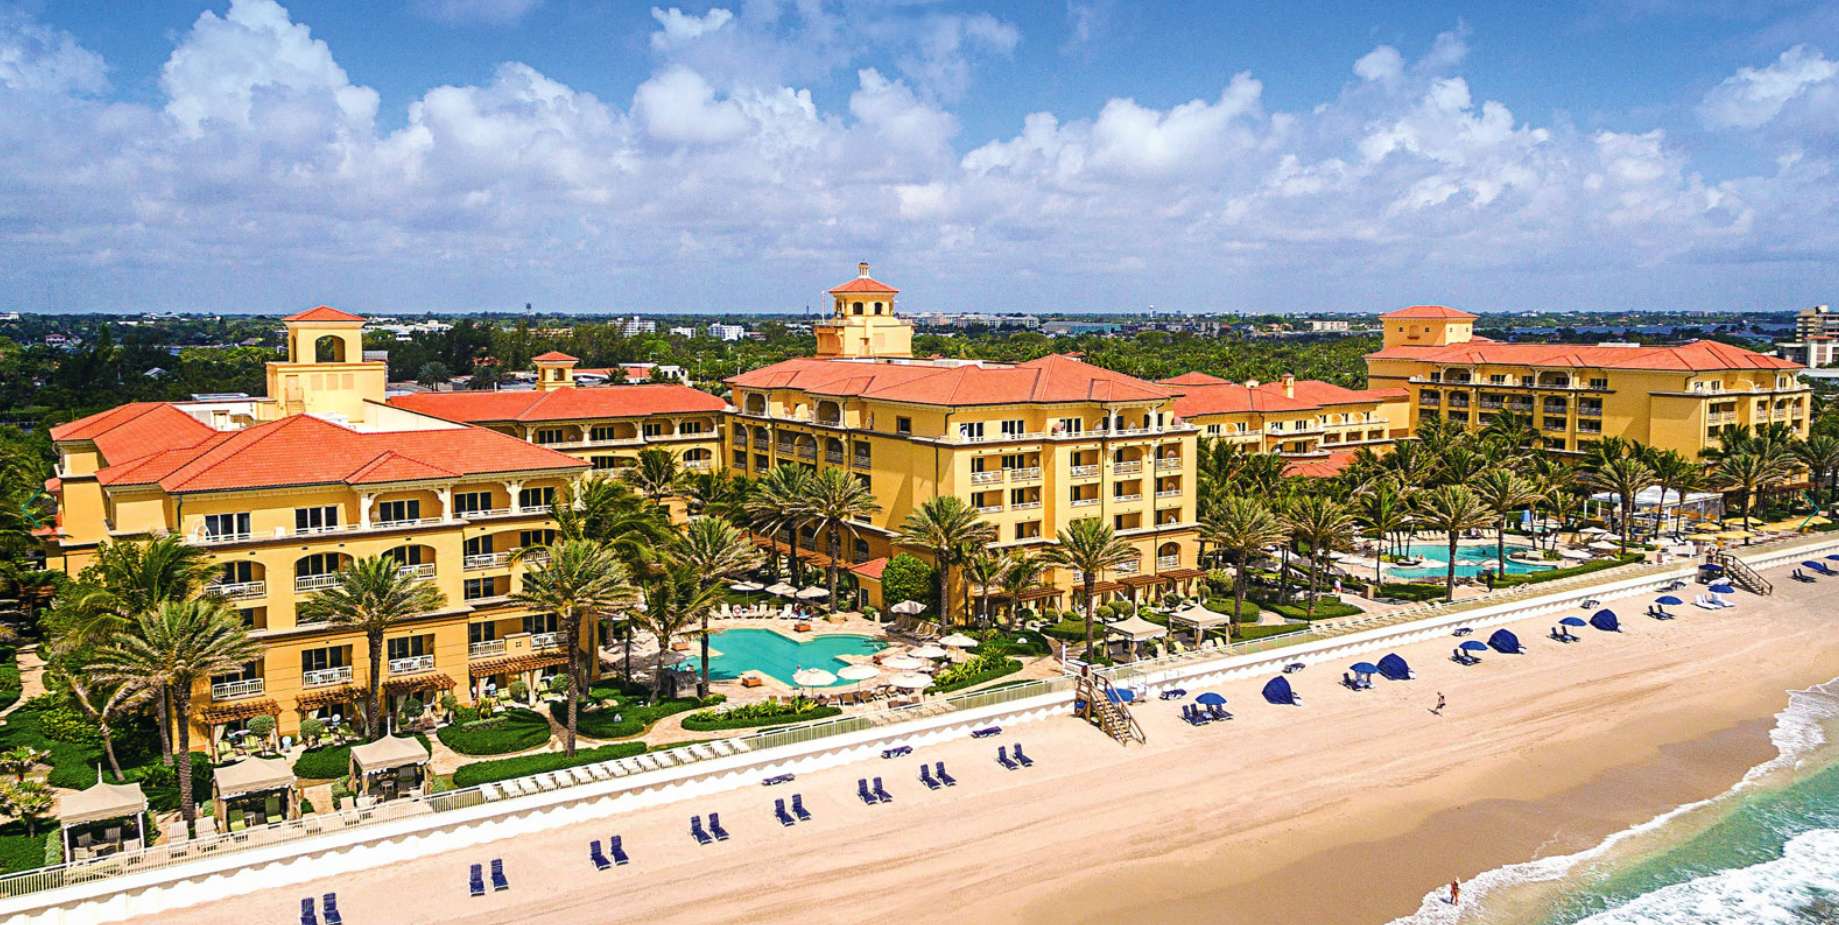 President Xi Jinping will stay at the Eau Palm Beach Resort and Spa, a few kilometres south of Mar-a-Lago. Photo: handout